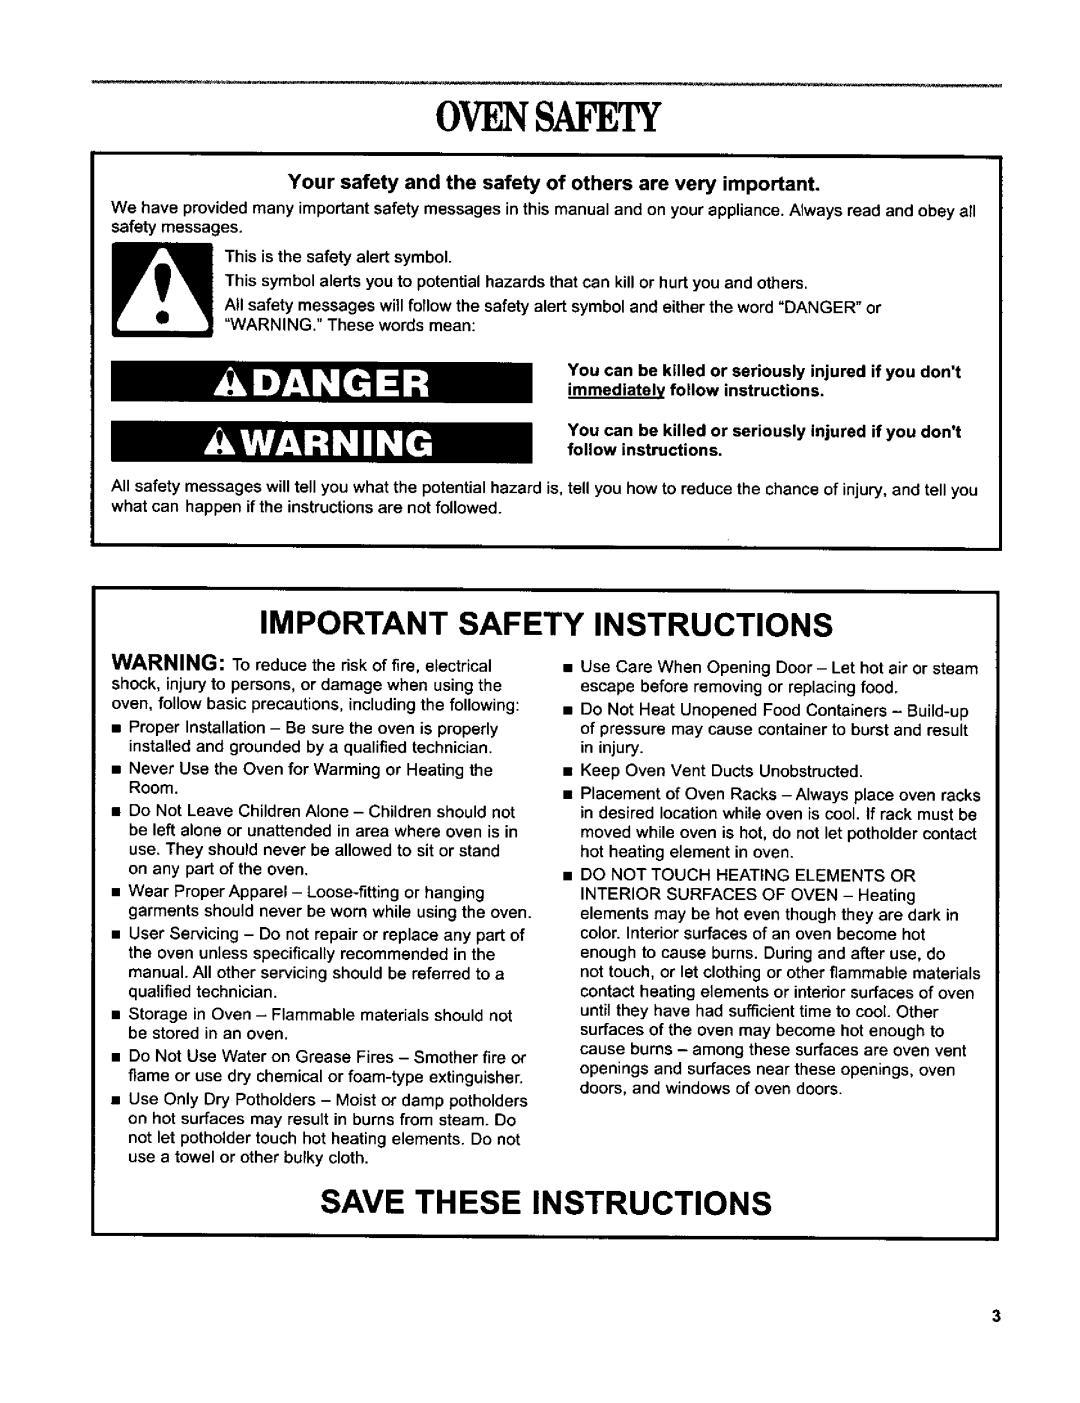 Whirlpool RBD306 manual Important Safety Instructions, Save These Instructions, Ovensafety 